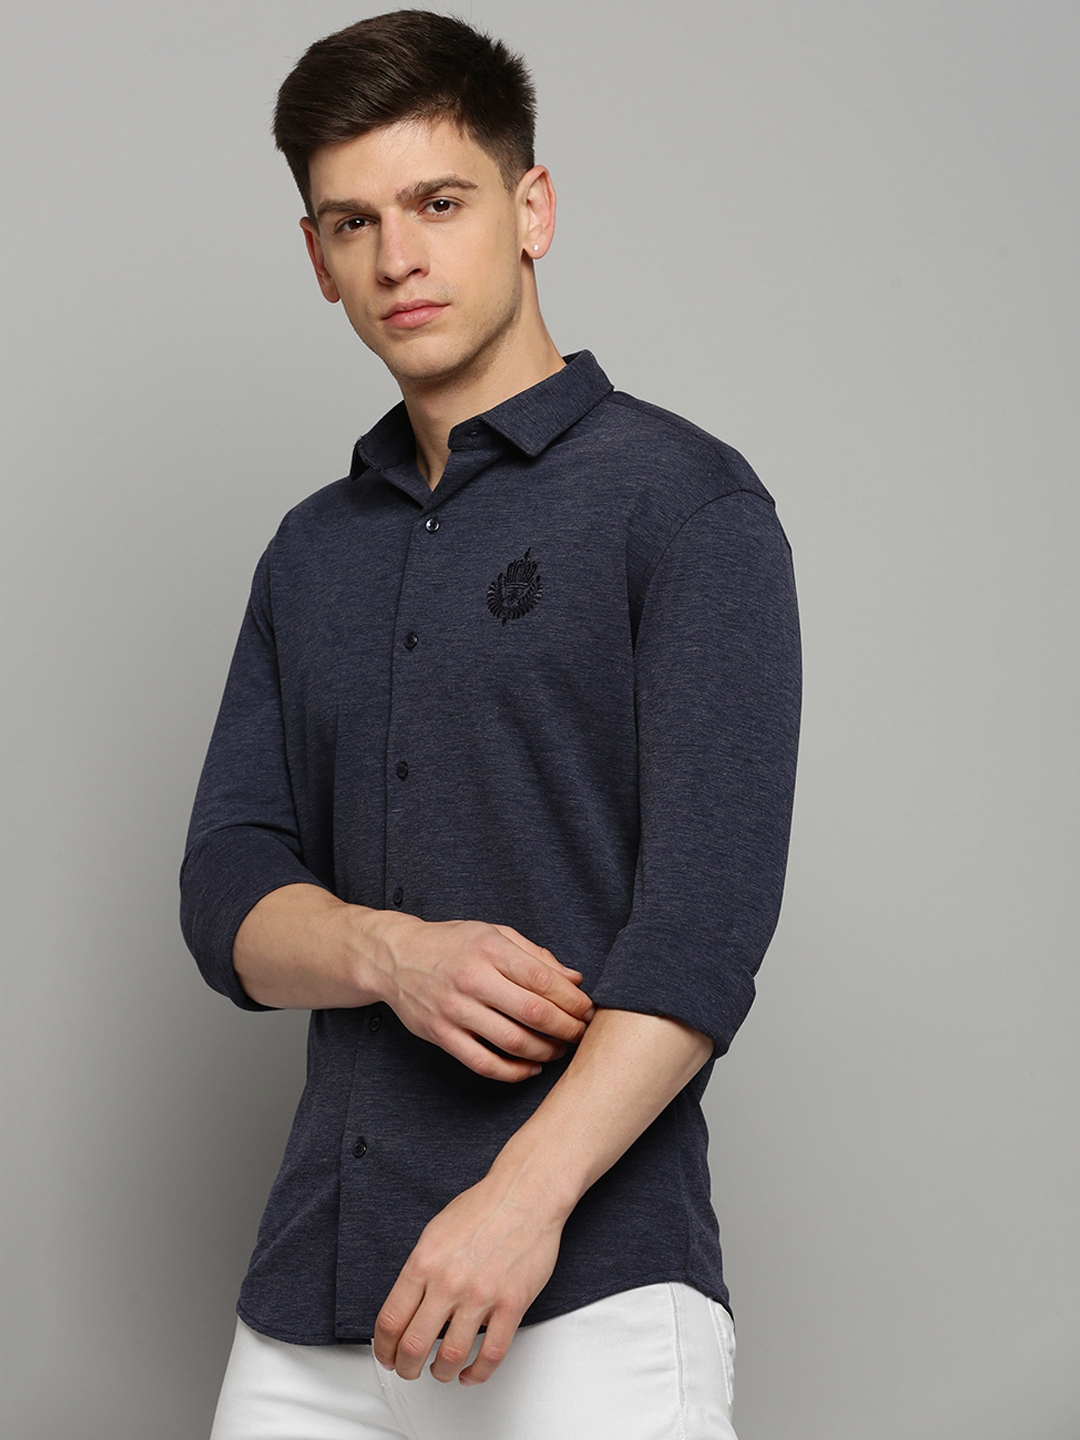 Showoff | SHOWOFF Men's Spread Collar Solid Navy Blue Classic Shirt 2